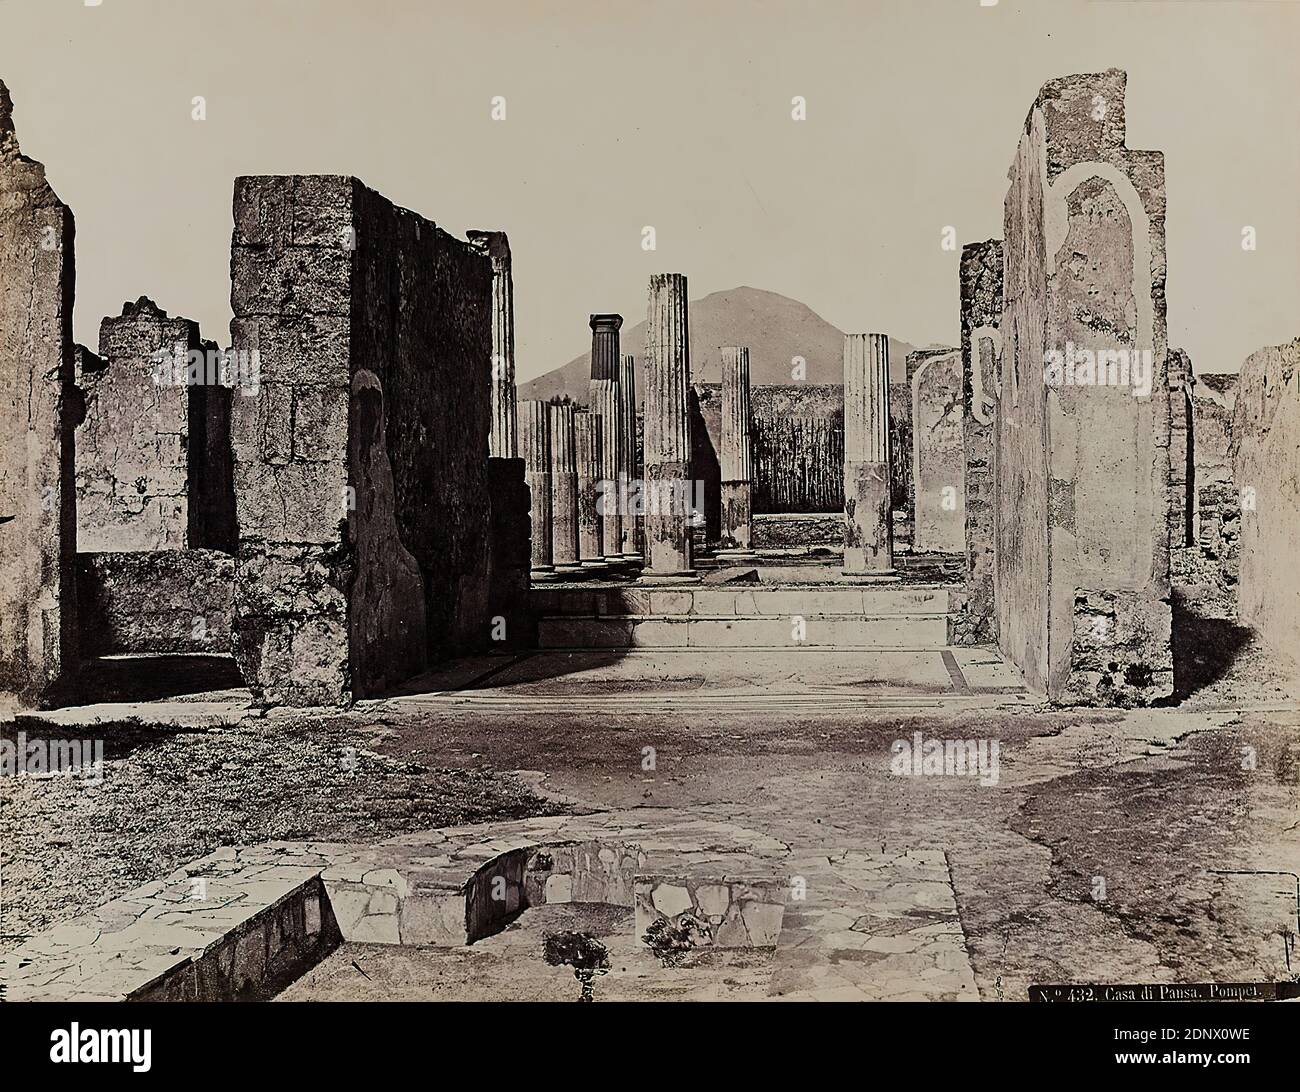 Robert Rive, Casa di Panza. Pompei, albumin paper, black and white positive process, image size: height: 20 cm; width: 26 cm, dry stamp: recto and on the cardboard: Robert Rive, Naples, inscribed: recto and right: title, travel photography, architectural photography, ruins, architectural details, hist. building, locality, street, archaeological excavation, classical-ancient history, Pompei Stock Photo